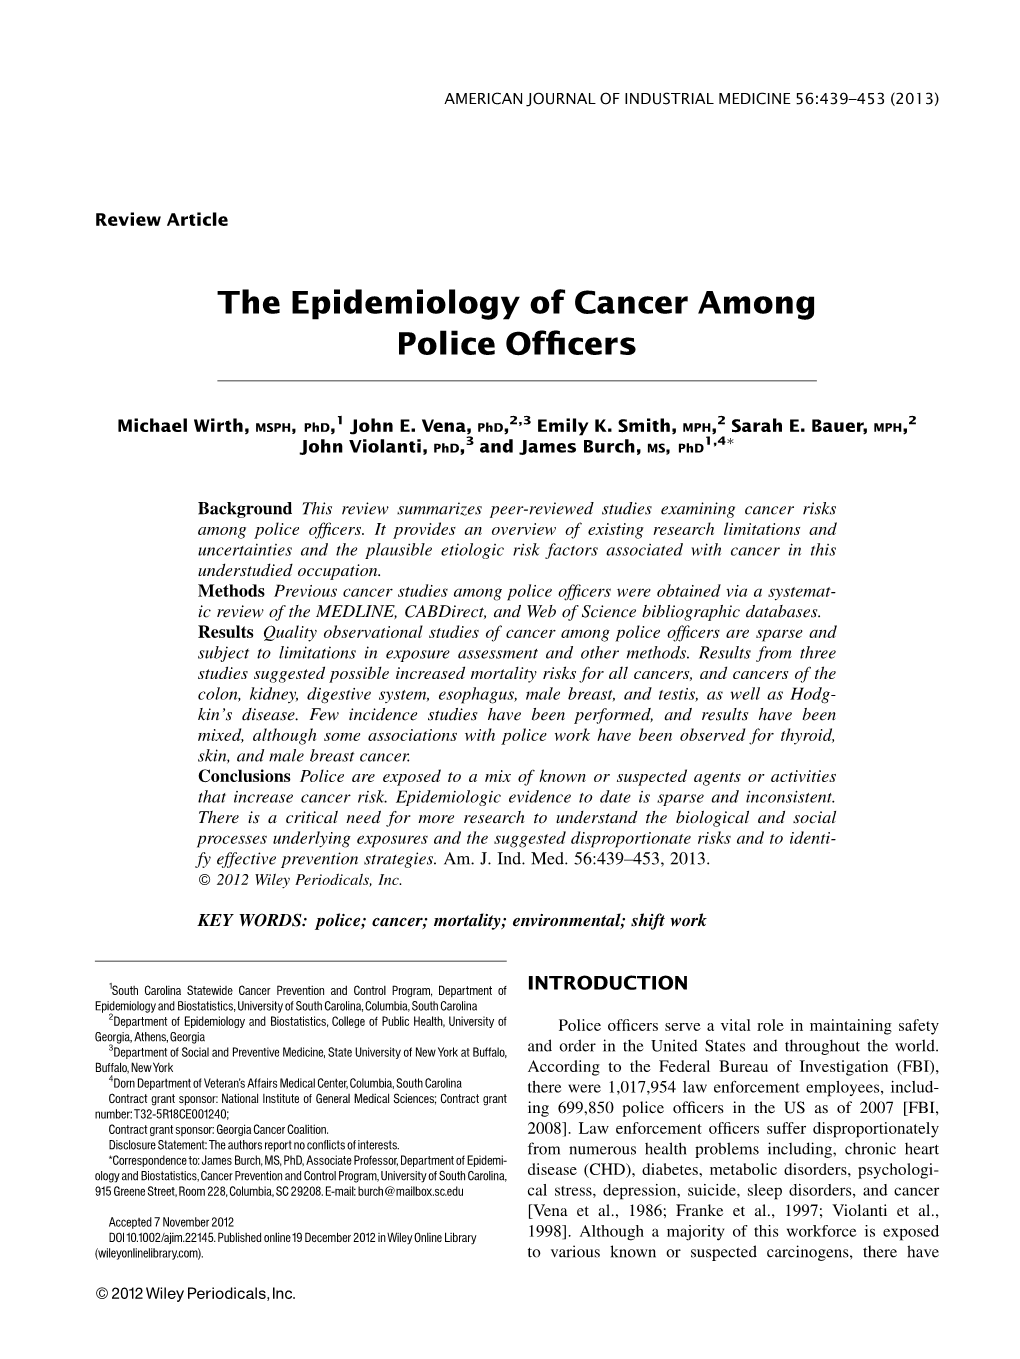 The Epidemiology of Cancer Among Police Officers